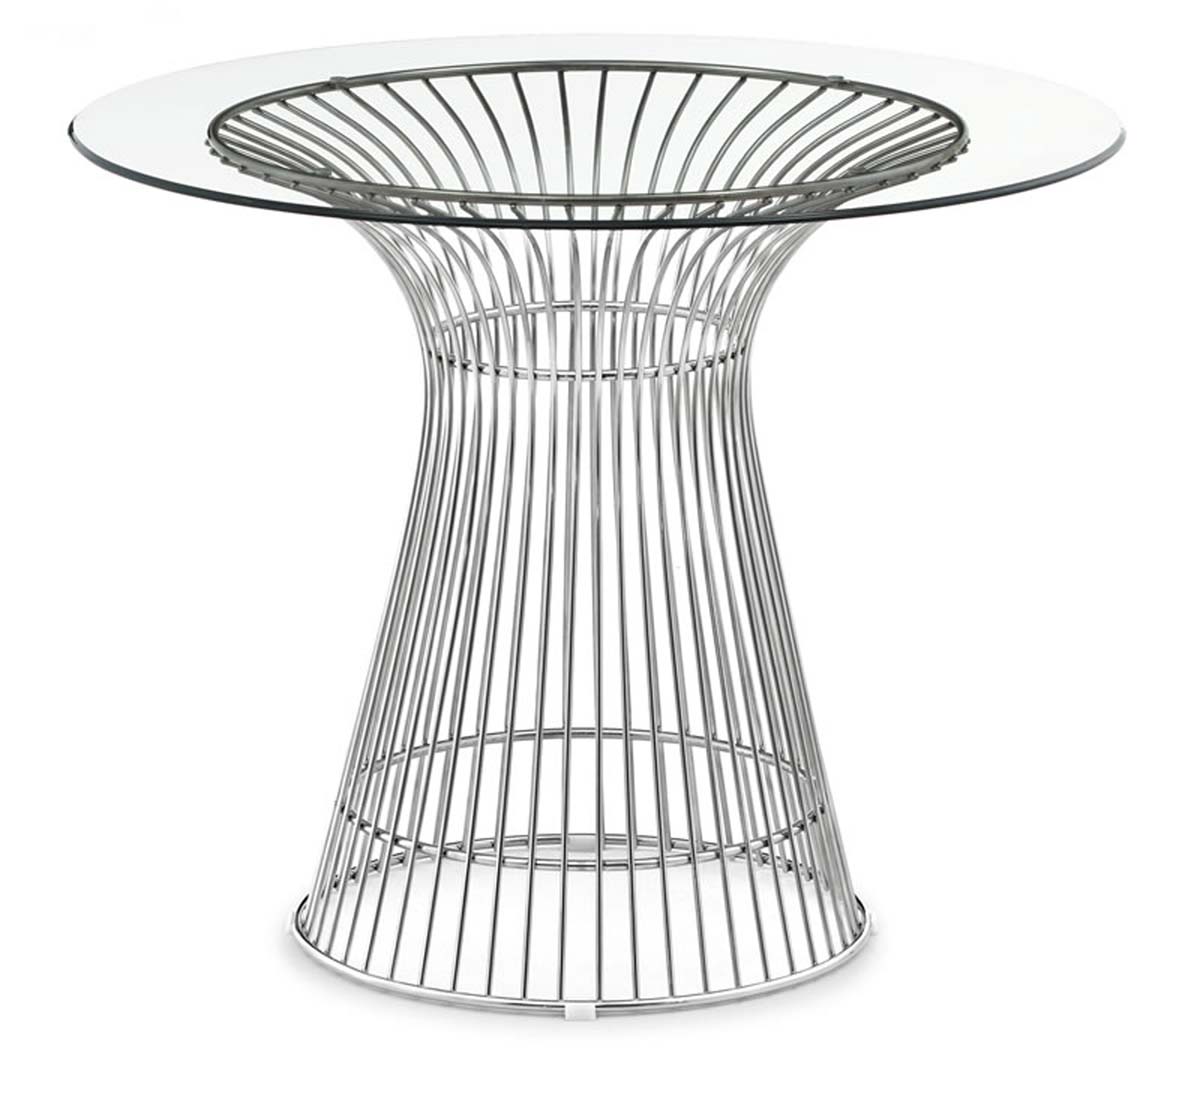 Zuo Modern Whitby Dining Table - Stainless Steel